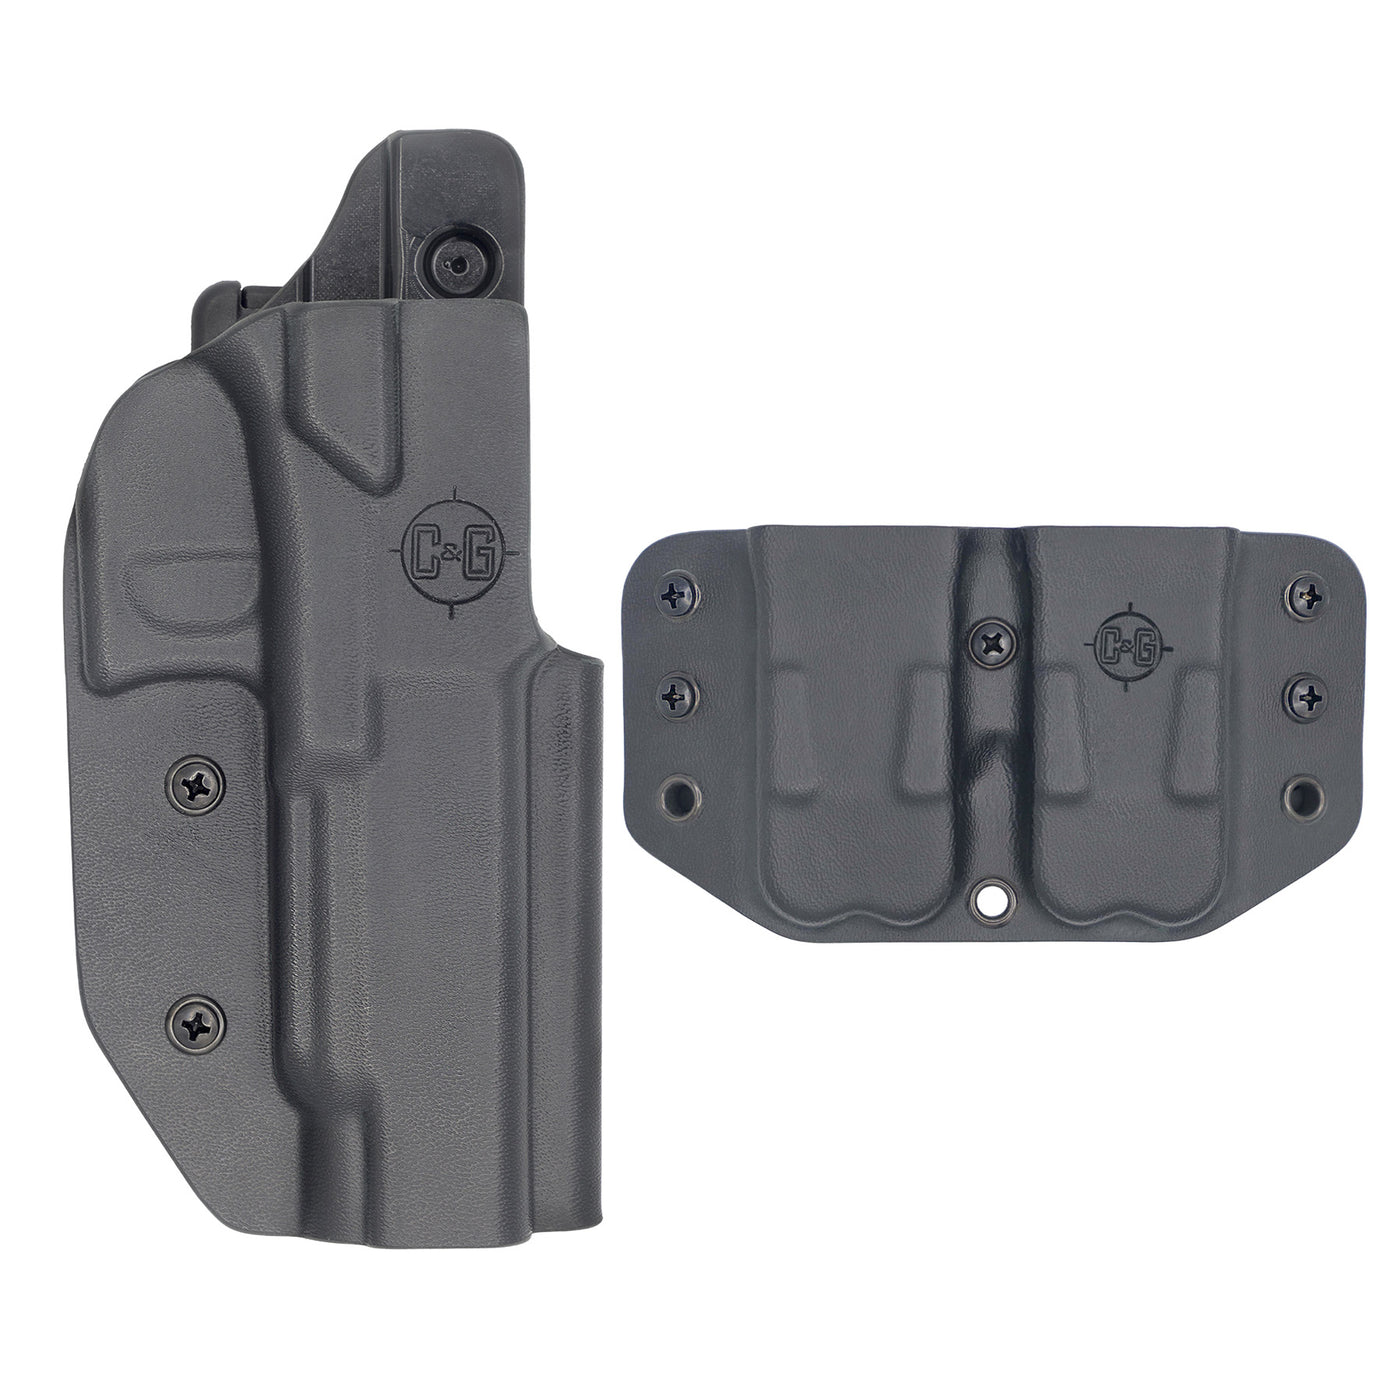 C&G Holsters Competition Starter Kit that is IDPA, USPSA & 3-GUN legal for Glock 34 9mm